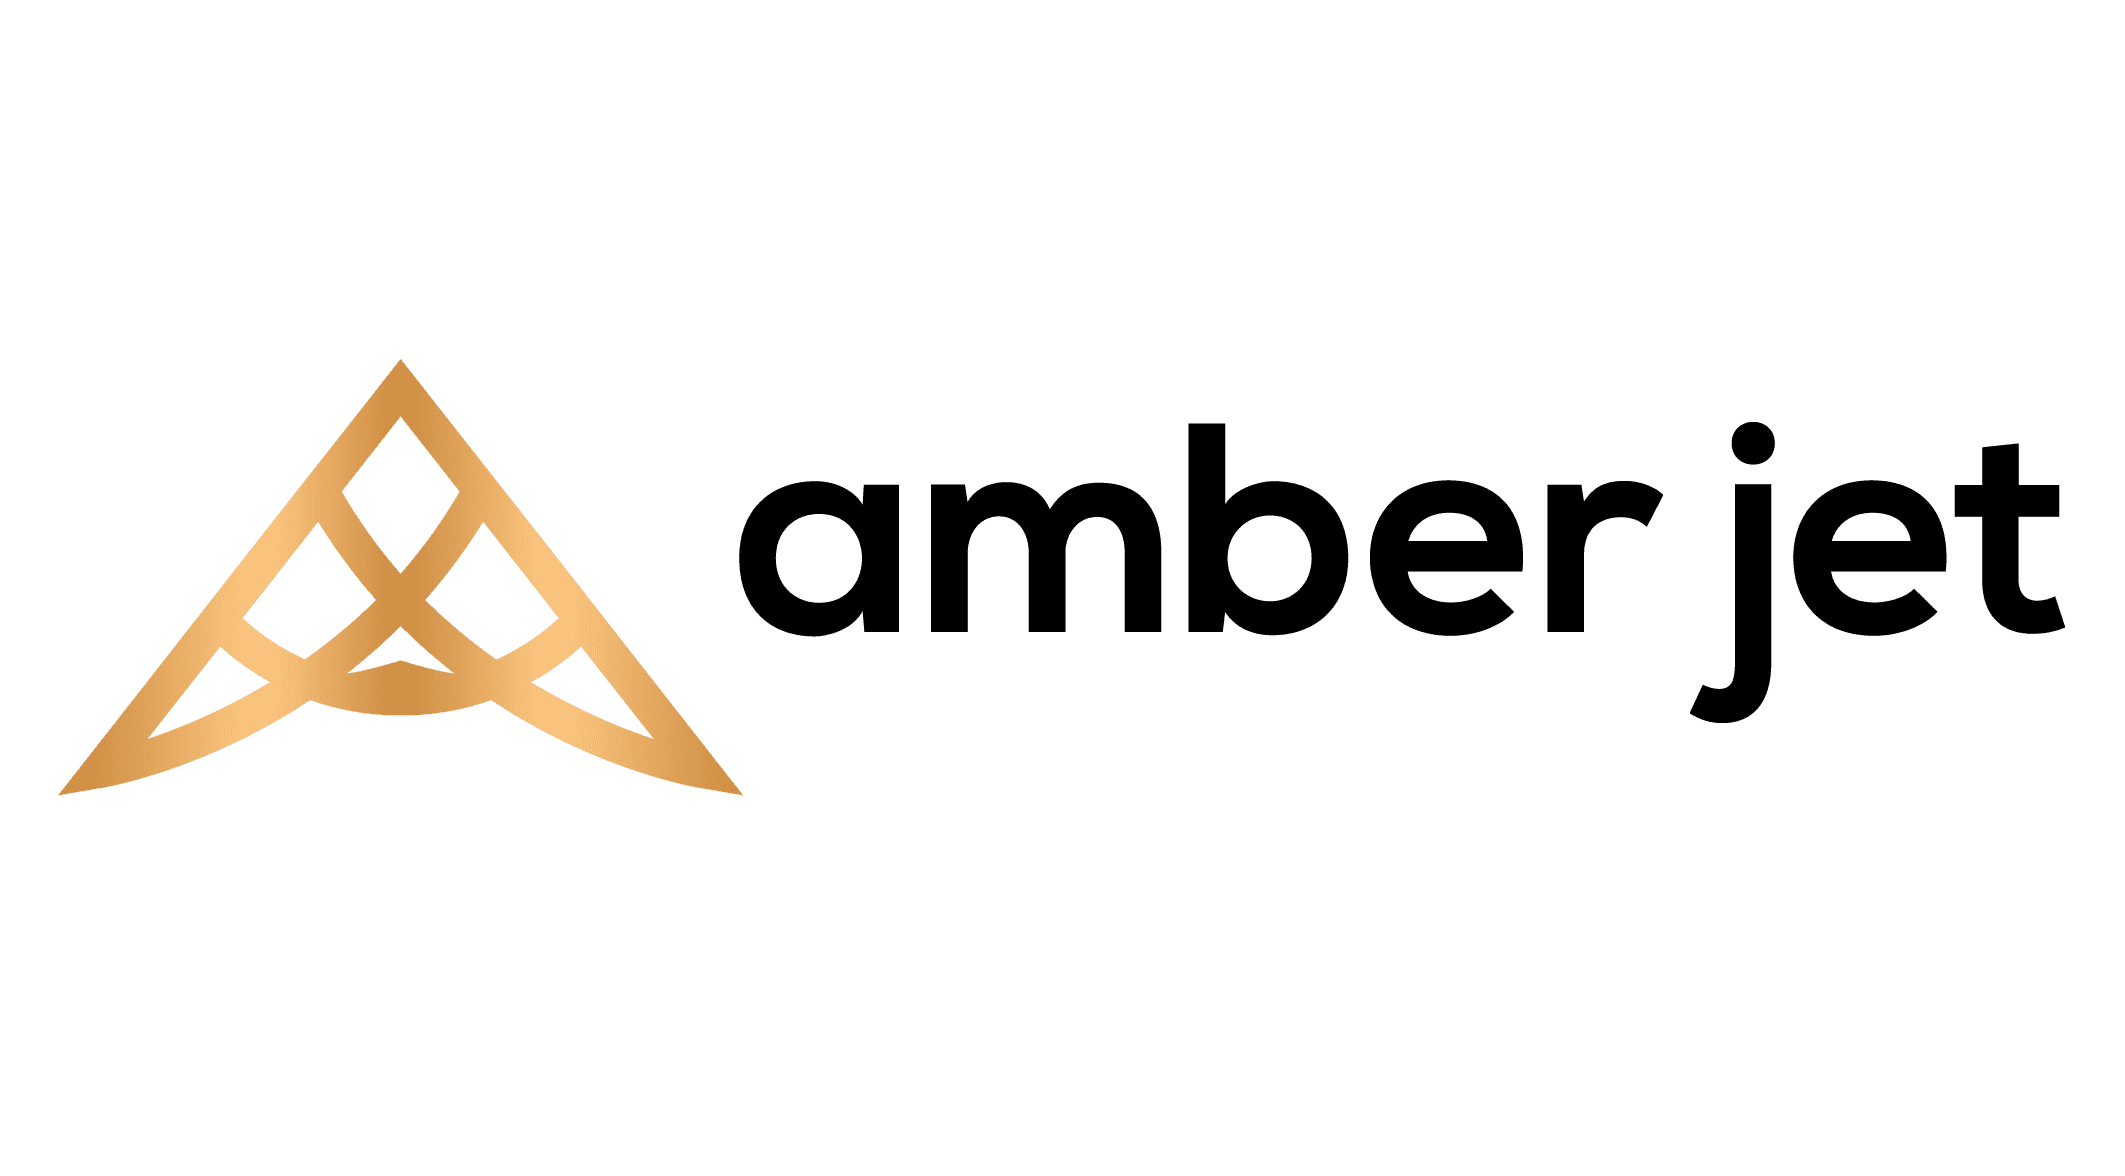 All-In-One Payment Platform - Amber Jet Logo 